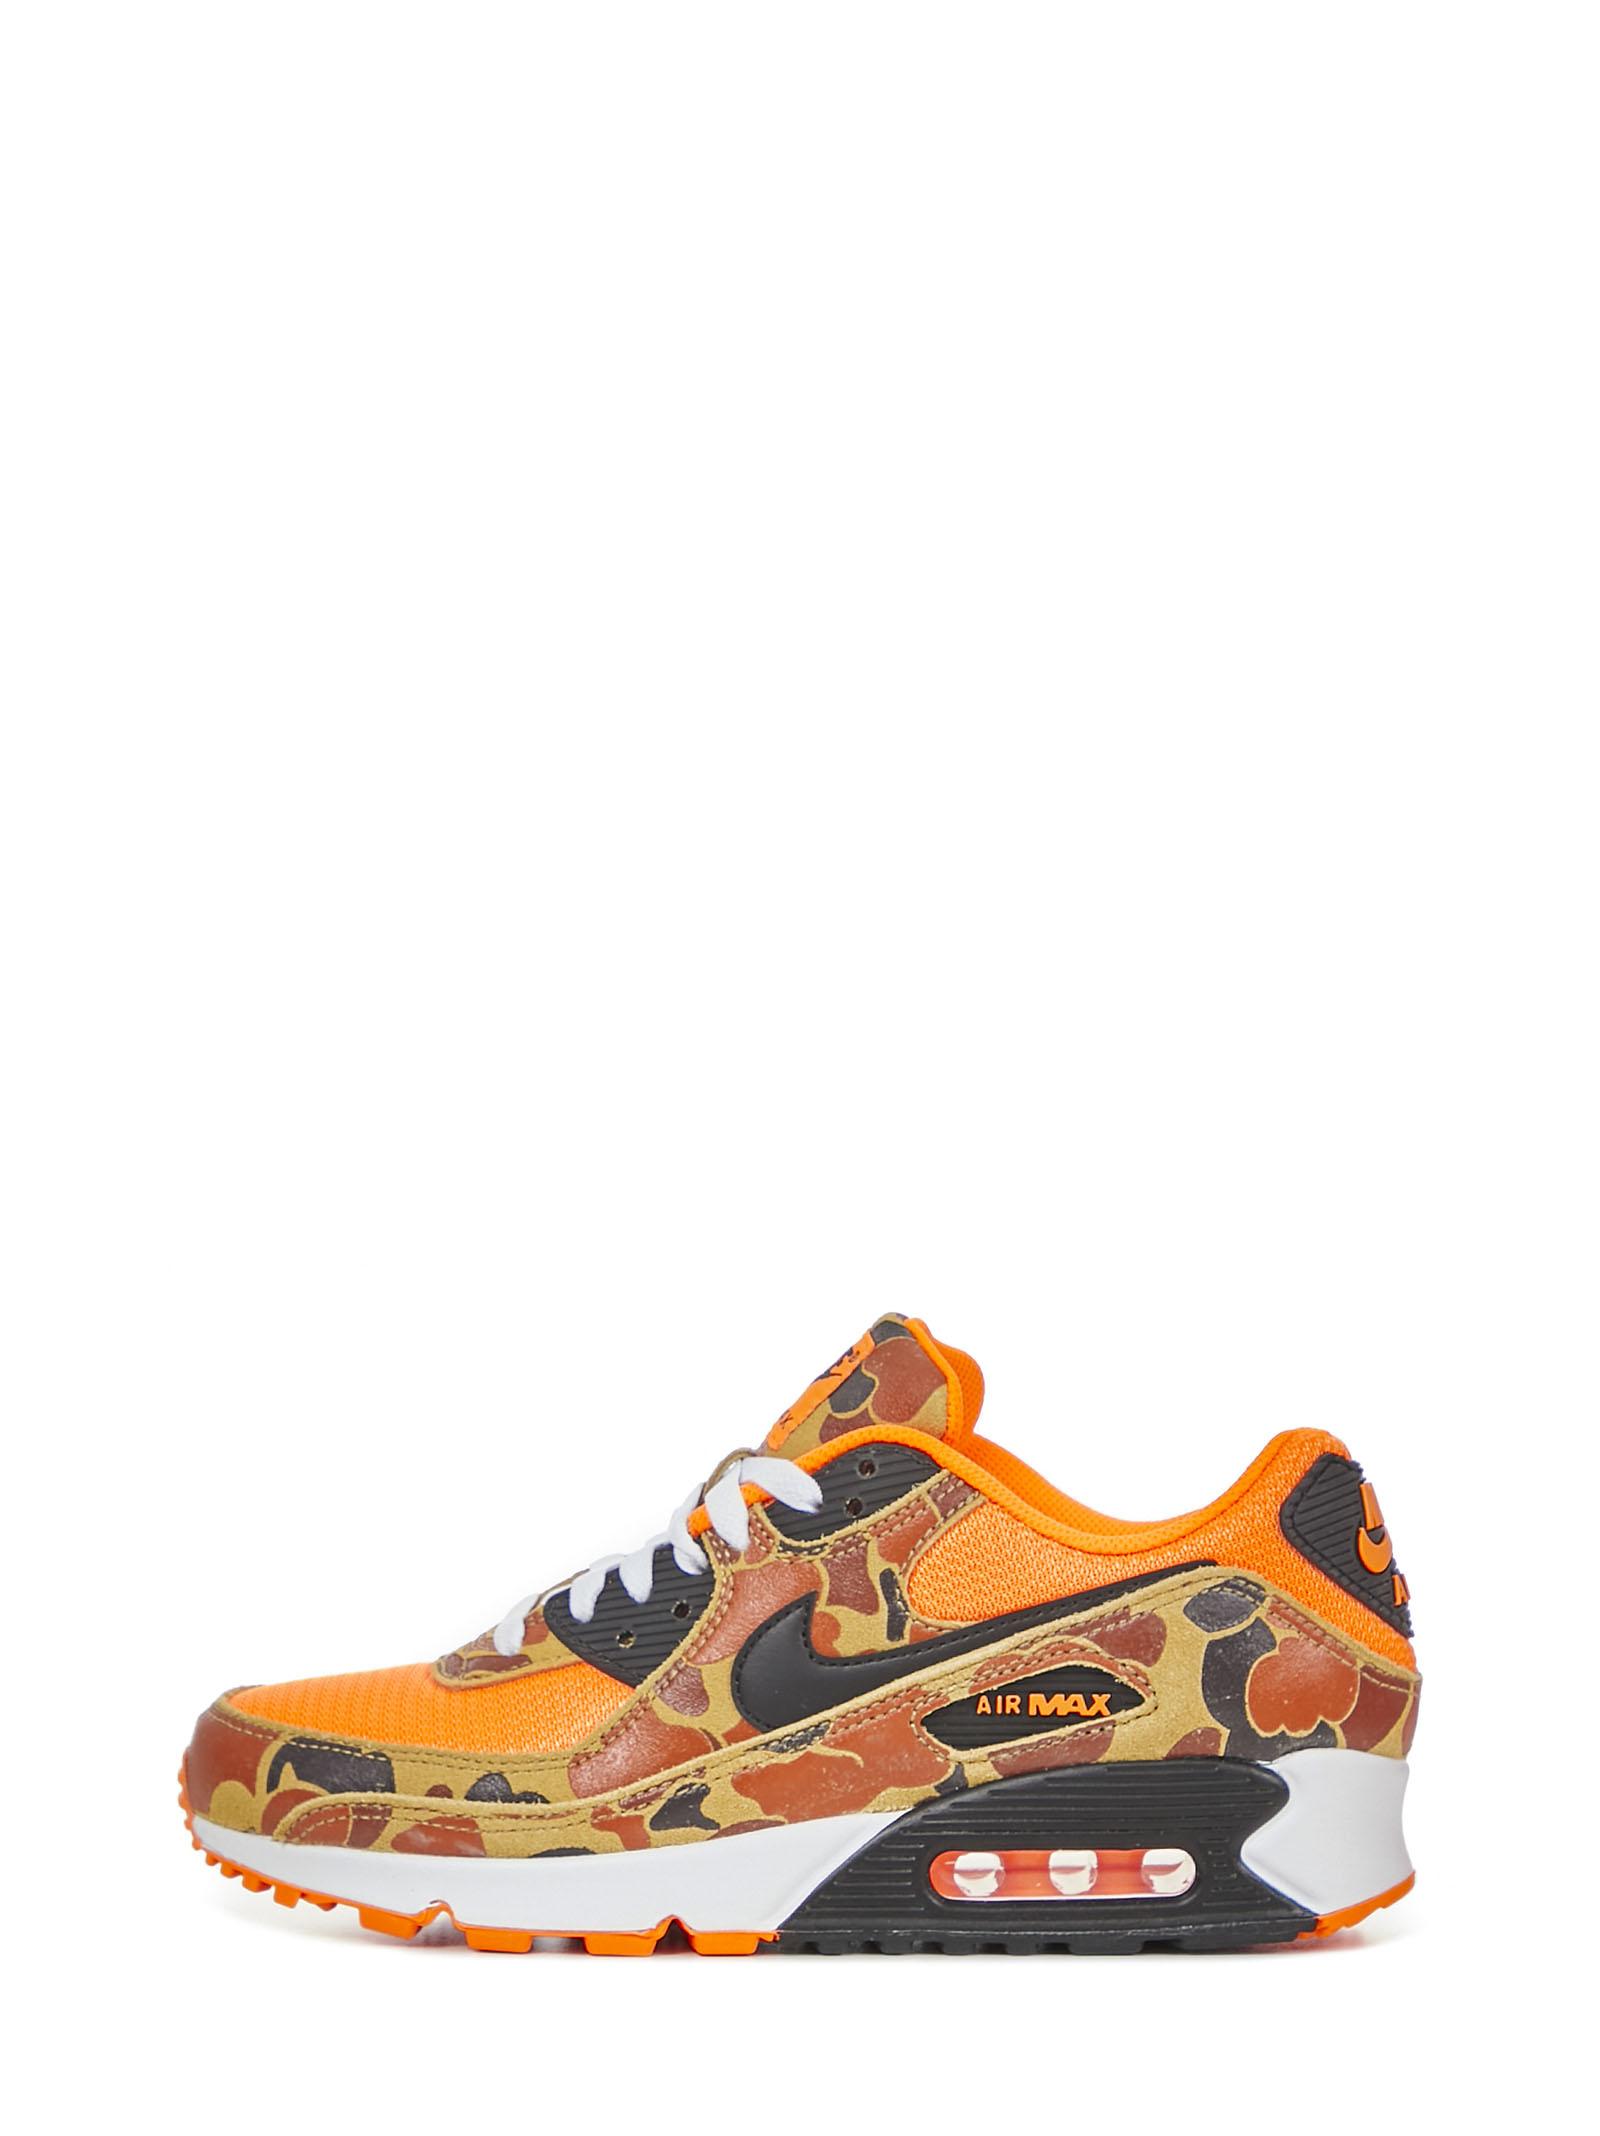 Nike Air Max 90 'orange Duck Camo' Shoes for Men - Save 63% - Lyst